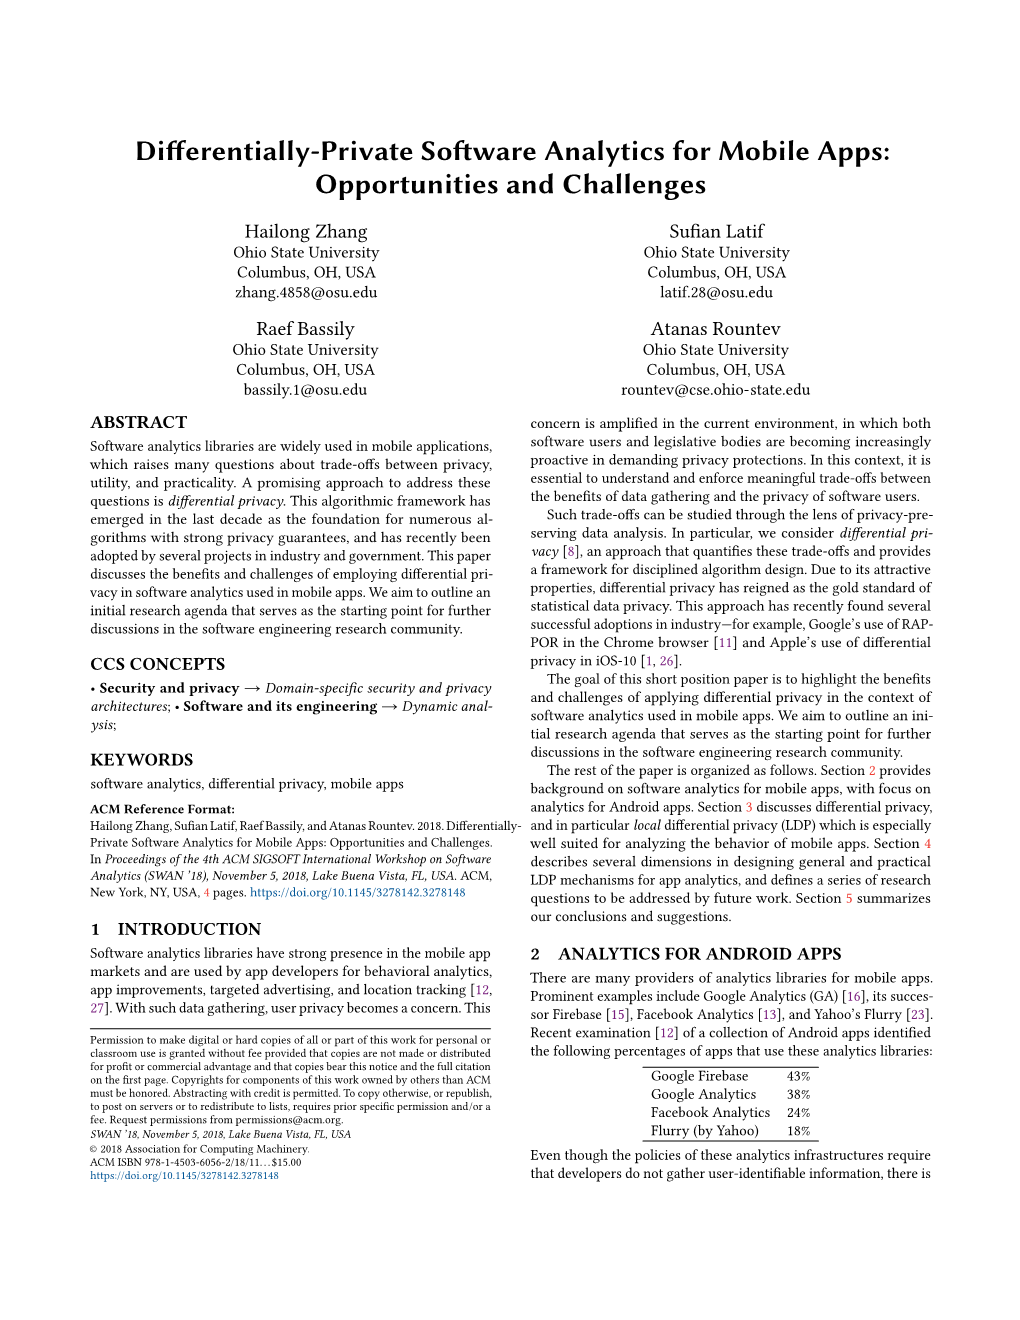 Differentially-Private Software Analytics for Mobile Apps: Opportunities and Challenges